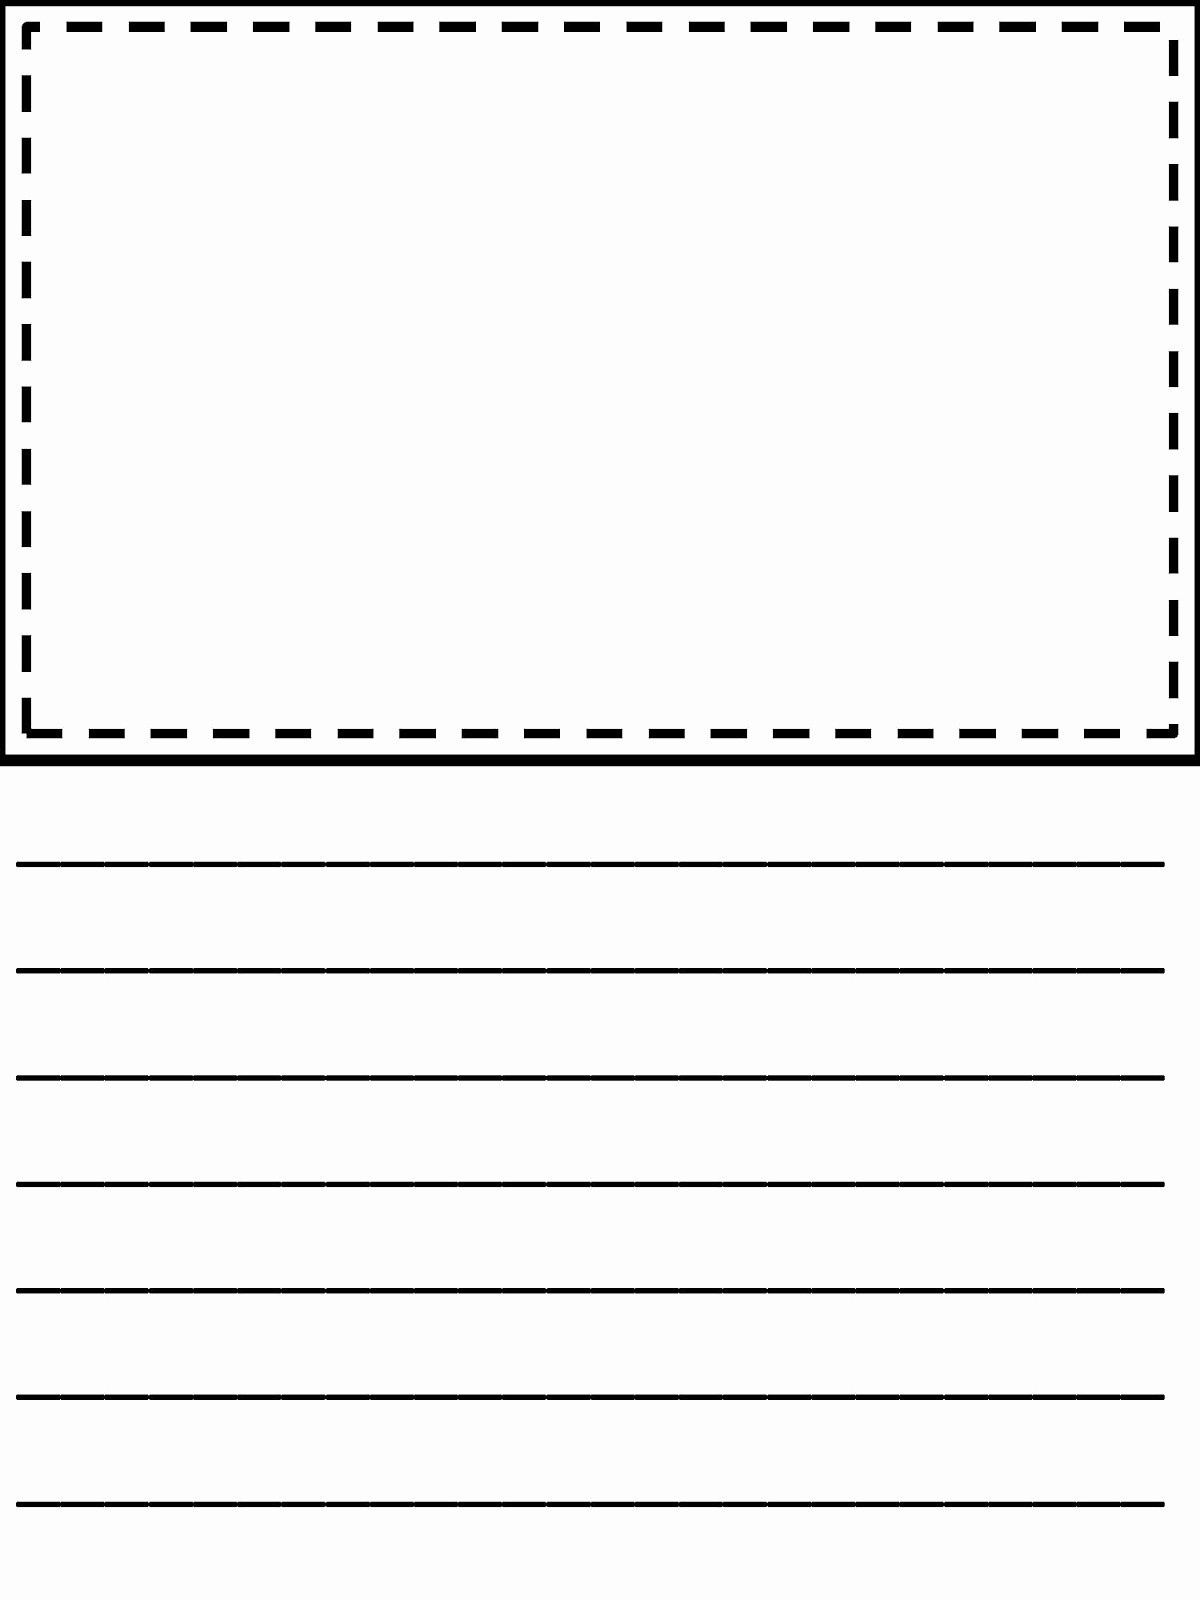 Lined Paper Free Printable For Kids With Picture Box